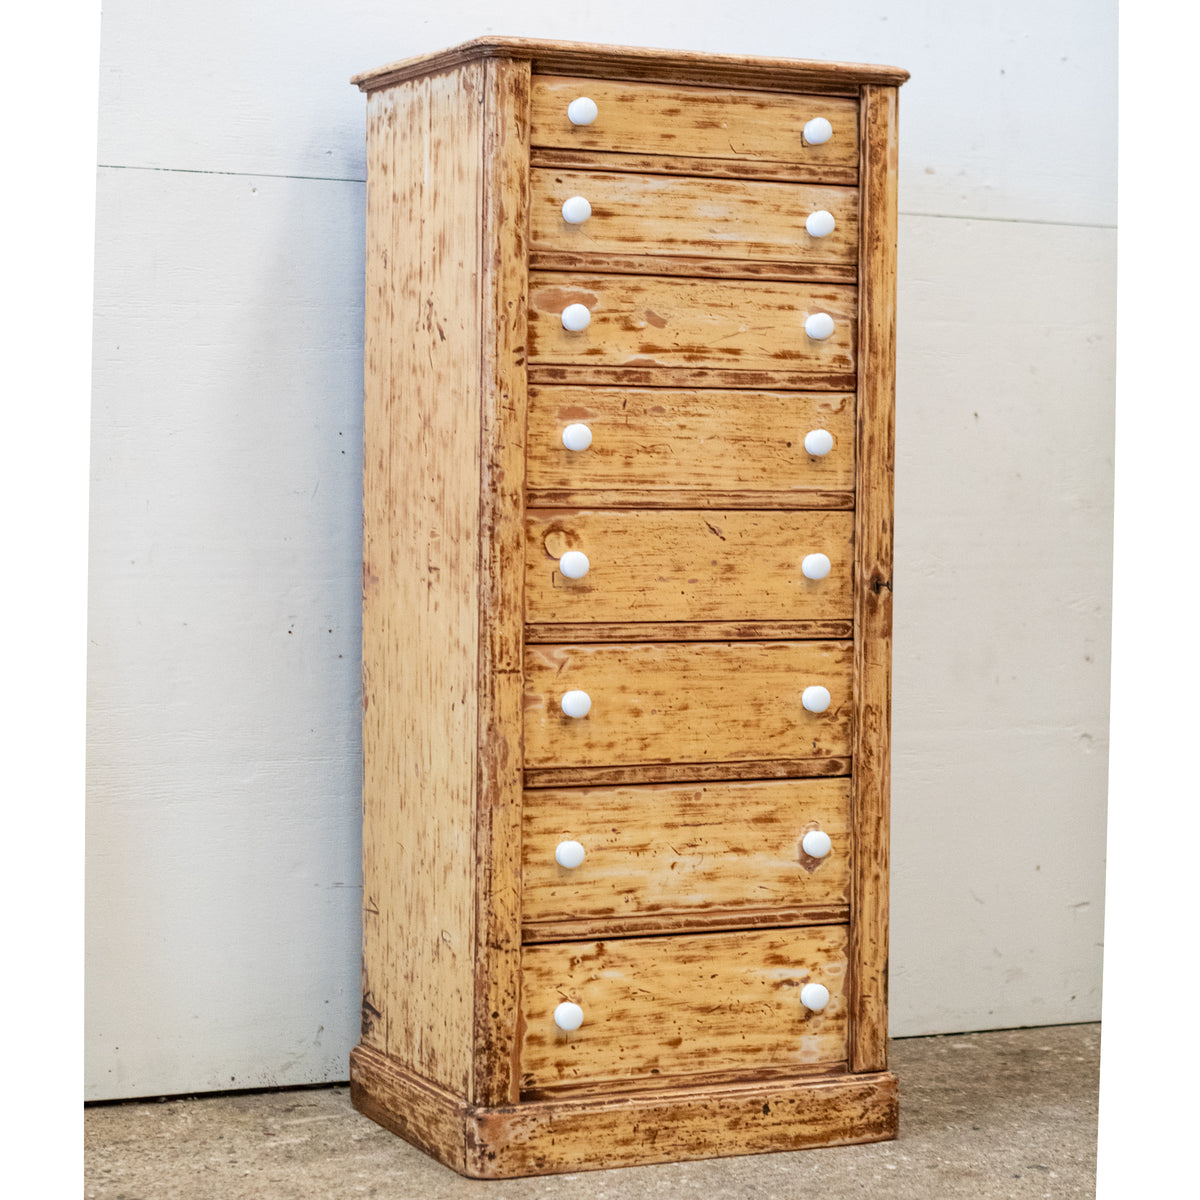 Antique Victorian Tallboy Wellngton Chest of Drawers | The Architectural Forum